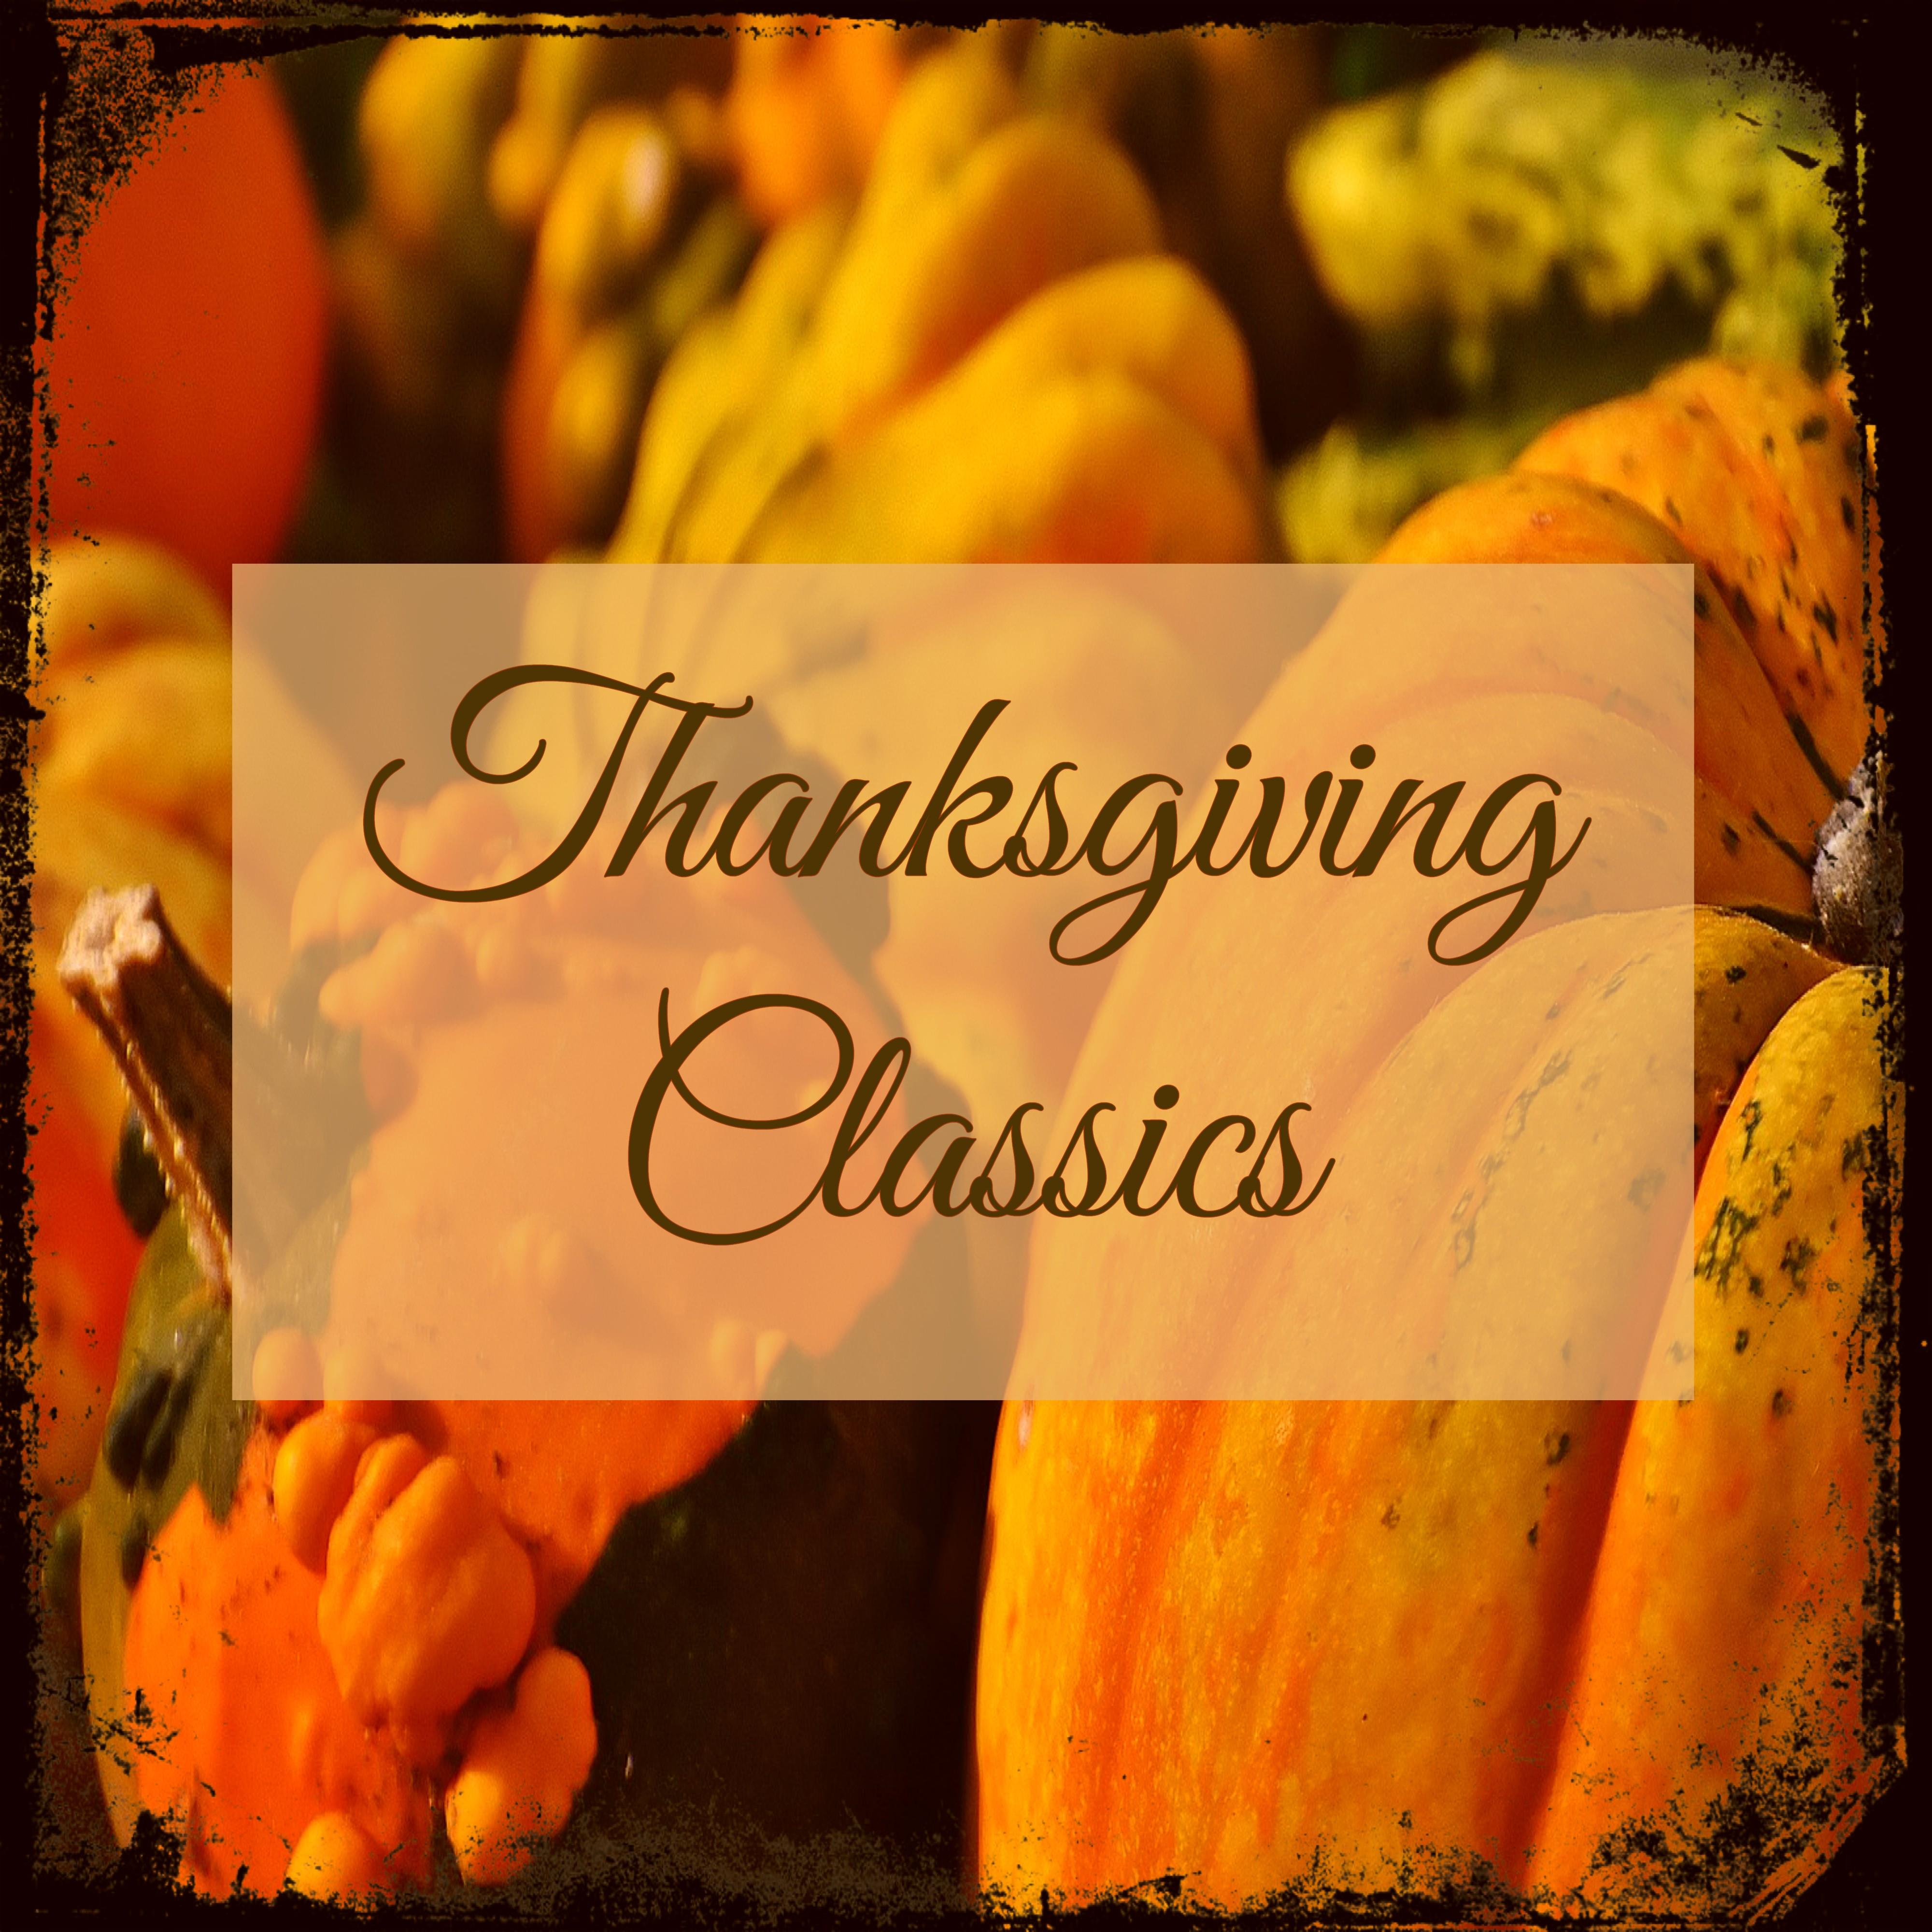 Thanksgiving Classics  Classical  Harpsichord Traditional Music for Thanksgiving Dinner and Family Reunion